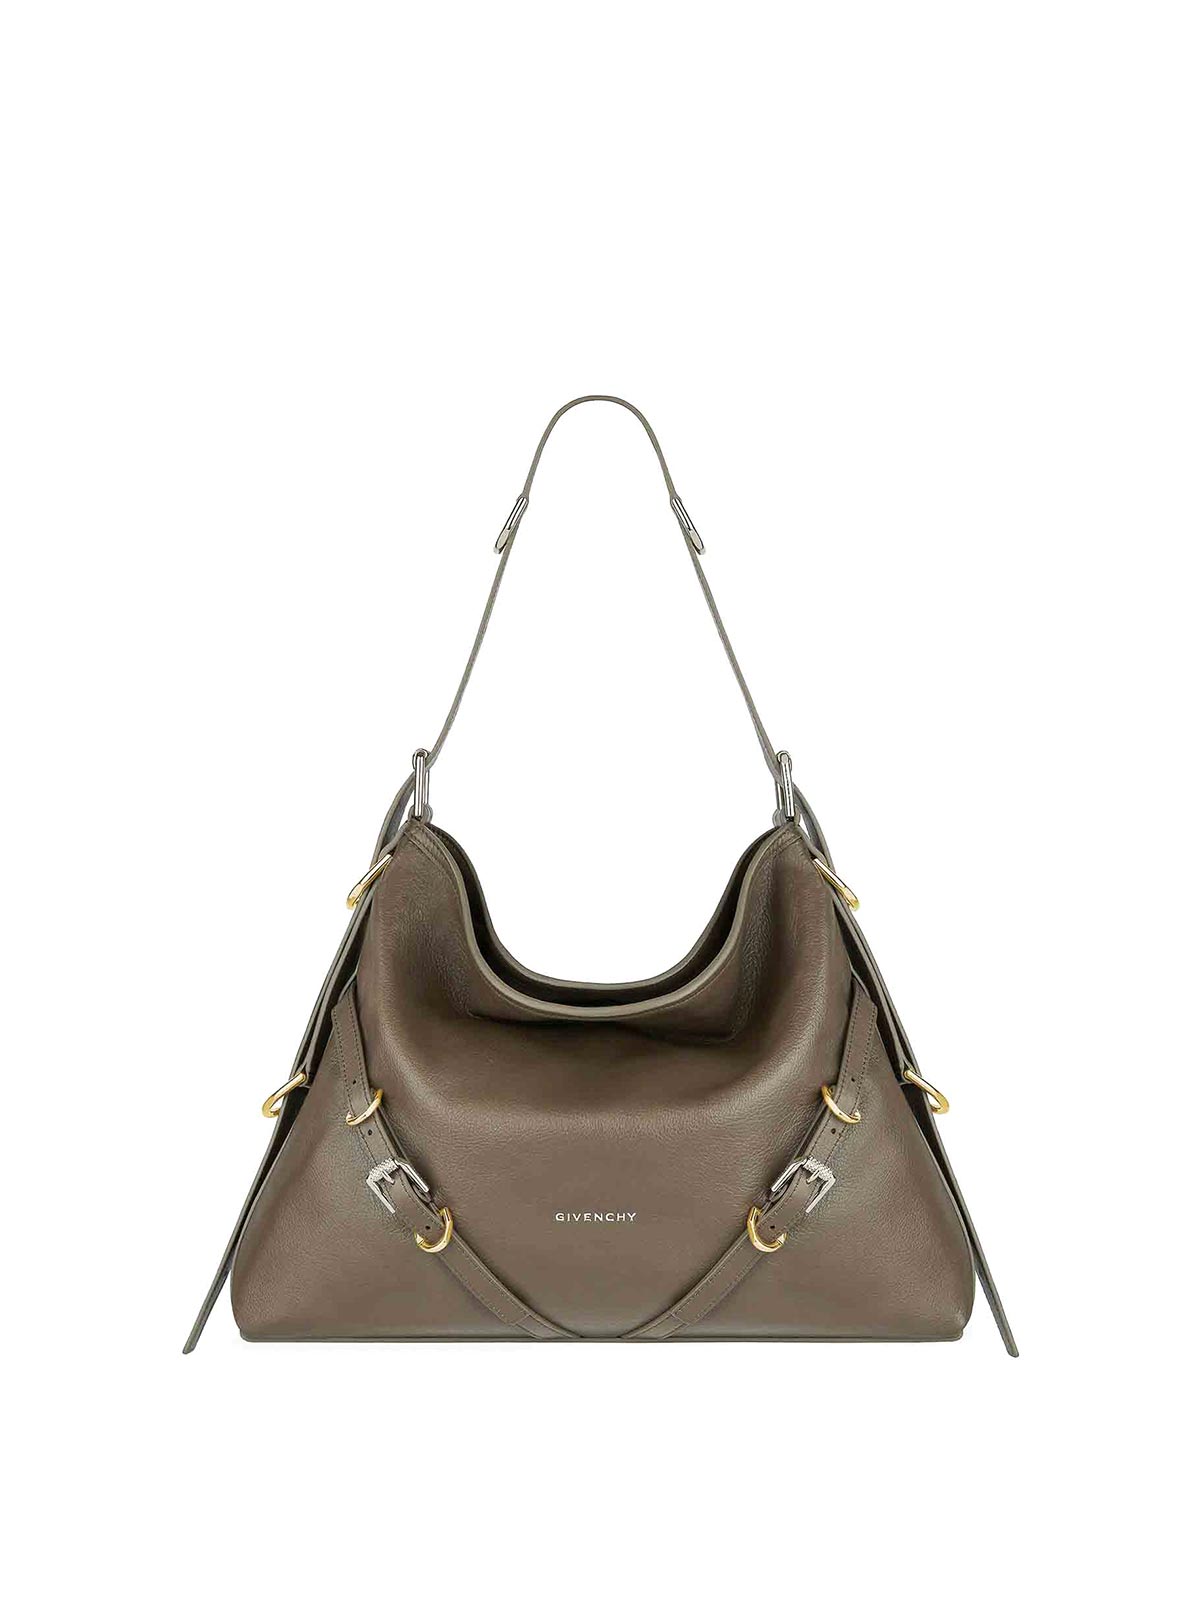 Givenchy Voyou Crossbody Bag In Taupe